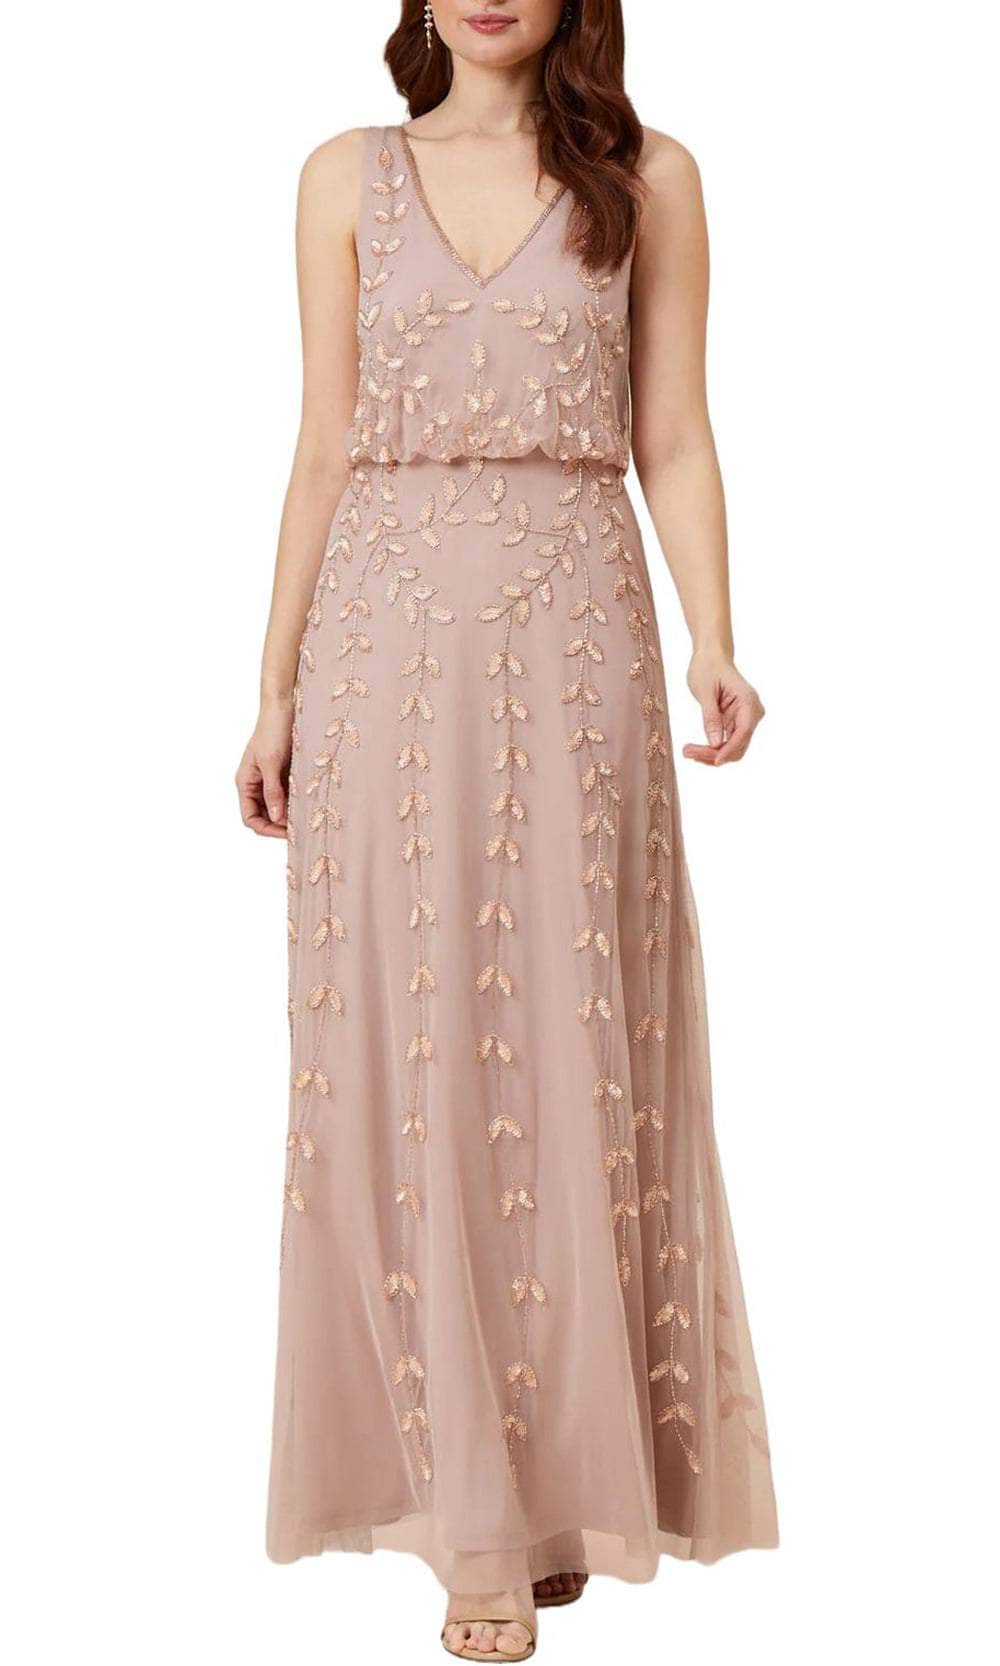 Adrianna Papell AP1E208913 - Embroidered Sheath Long Dress Mother of the Bride Dresses 0 / Steel Rose